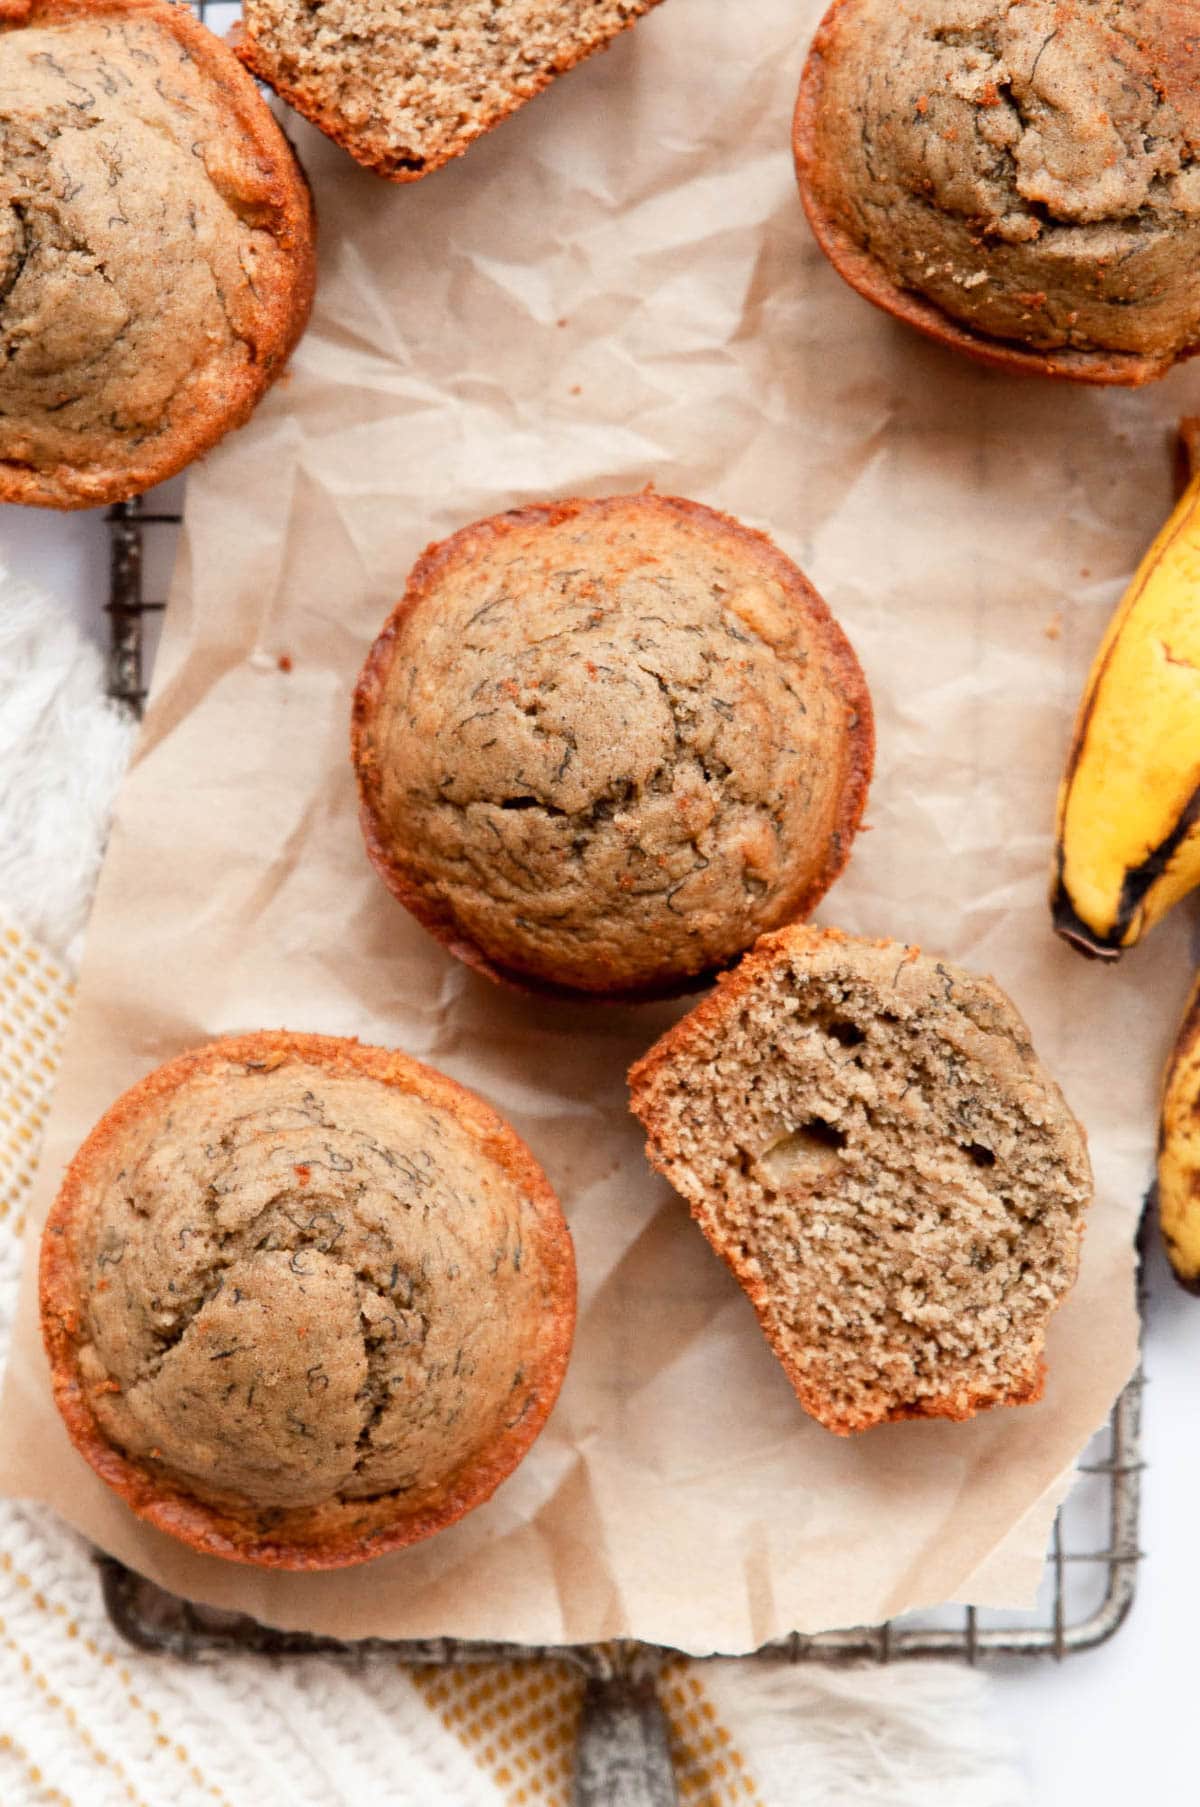 Two oat flour banana muffins and one sliced on parchment paper.